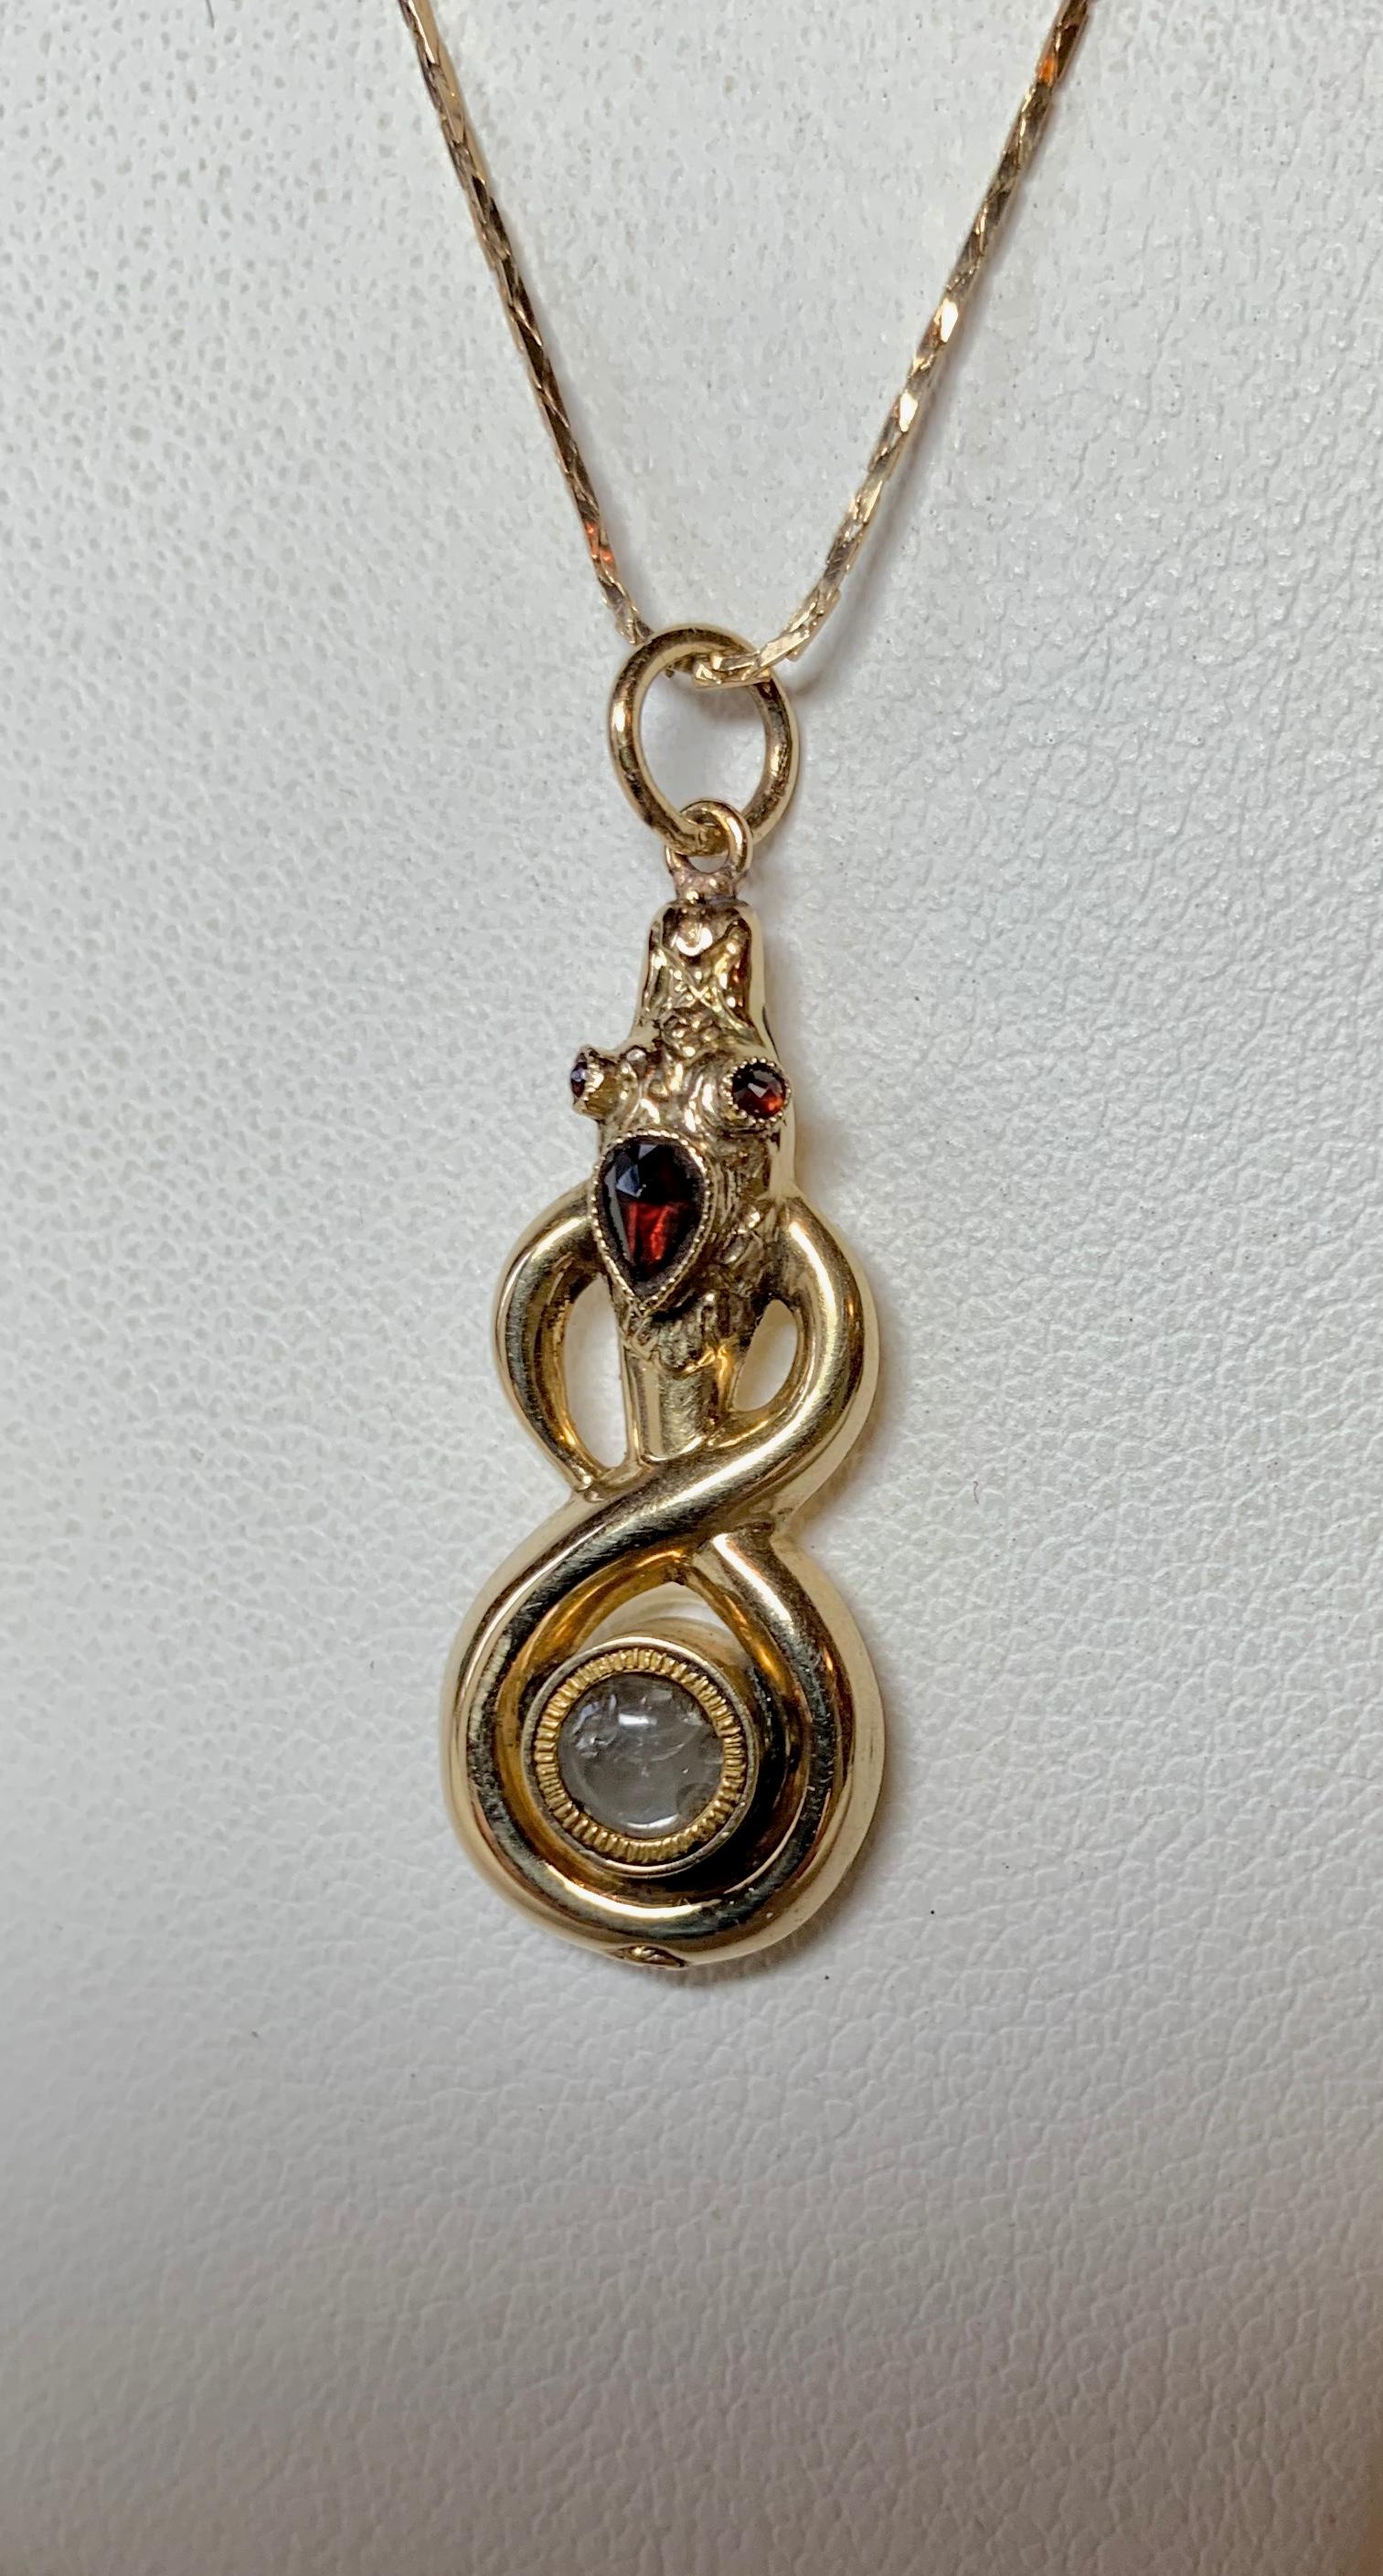 A very rare antique Georgian to Victorian Snake Pendant Locket with a small hinged Locket opening in which to place a treasured memento, a mourning item, or possibly poison!  The extraordinary Snake Pendant is 14 Karat Gold.  The head and eyes of